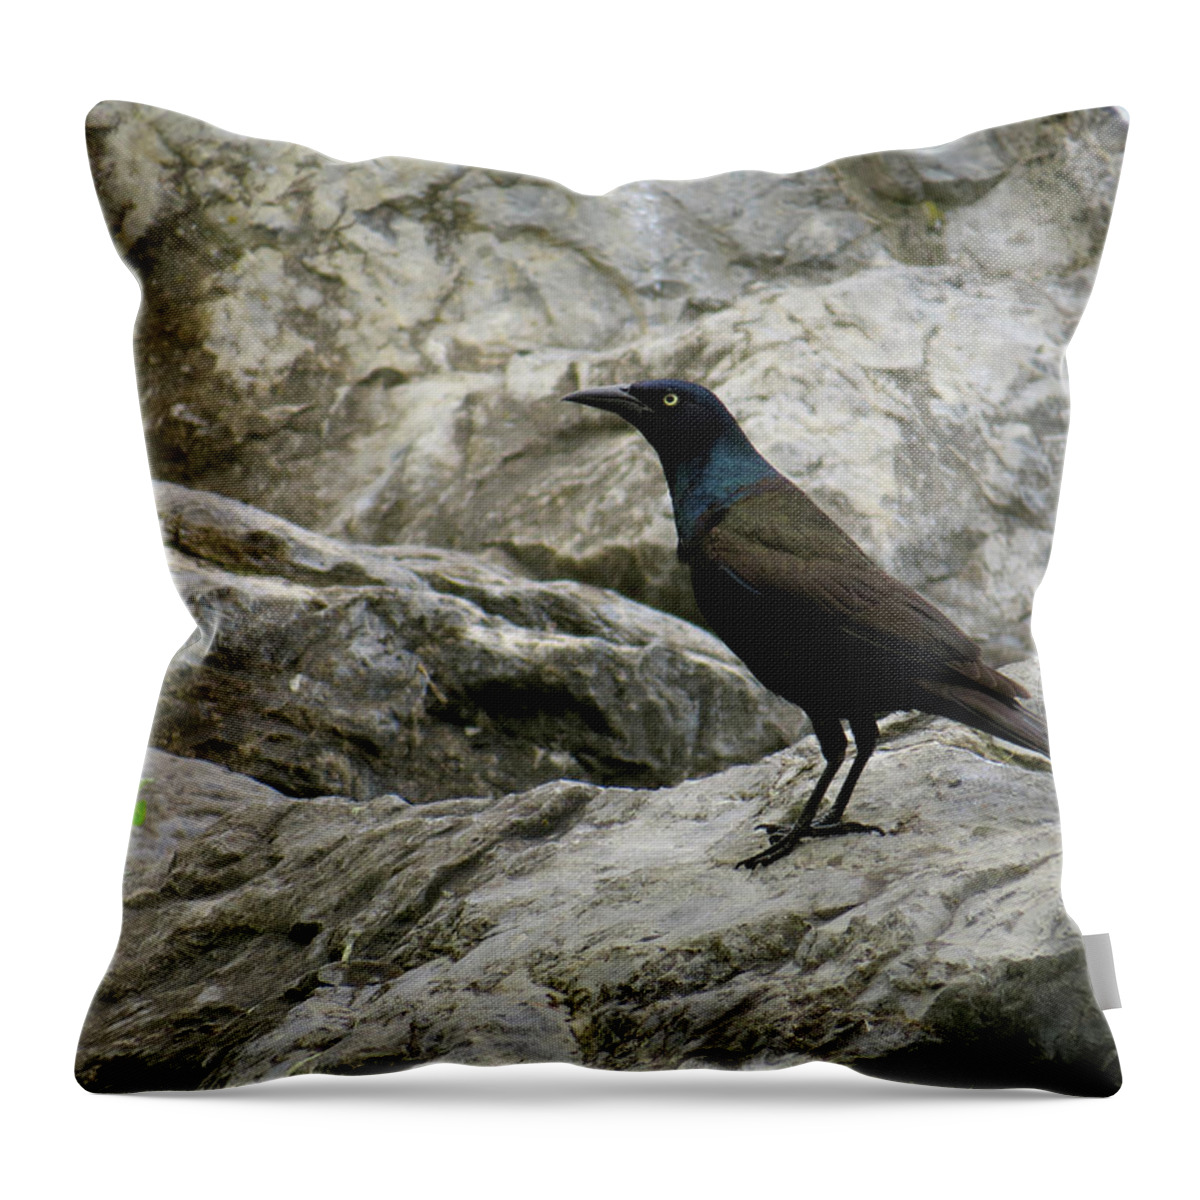 Grackle Throw Pillow featuring the photograph Upon the Rocks by Azthet Photography